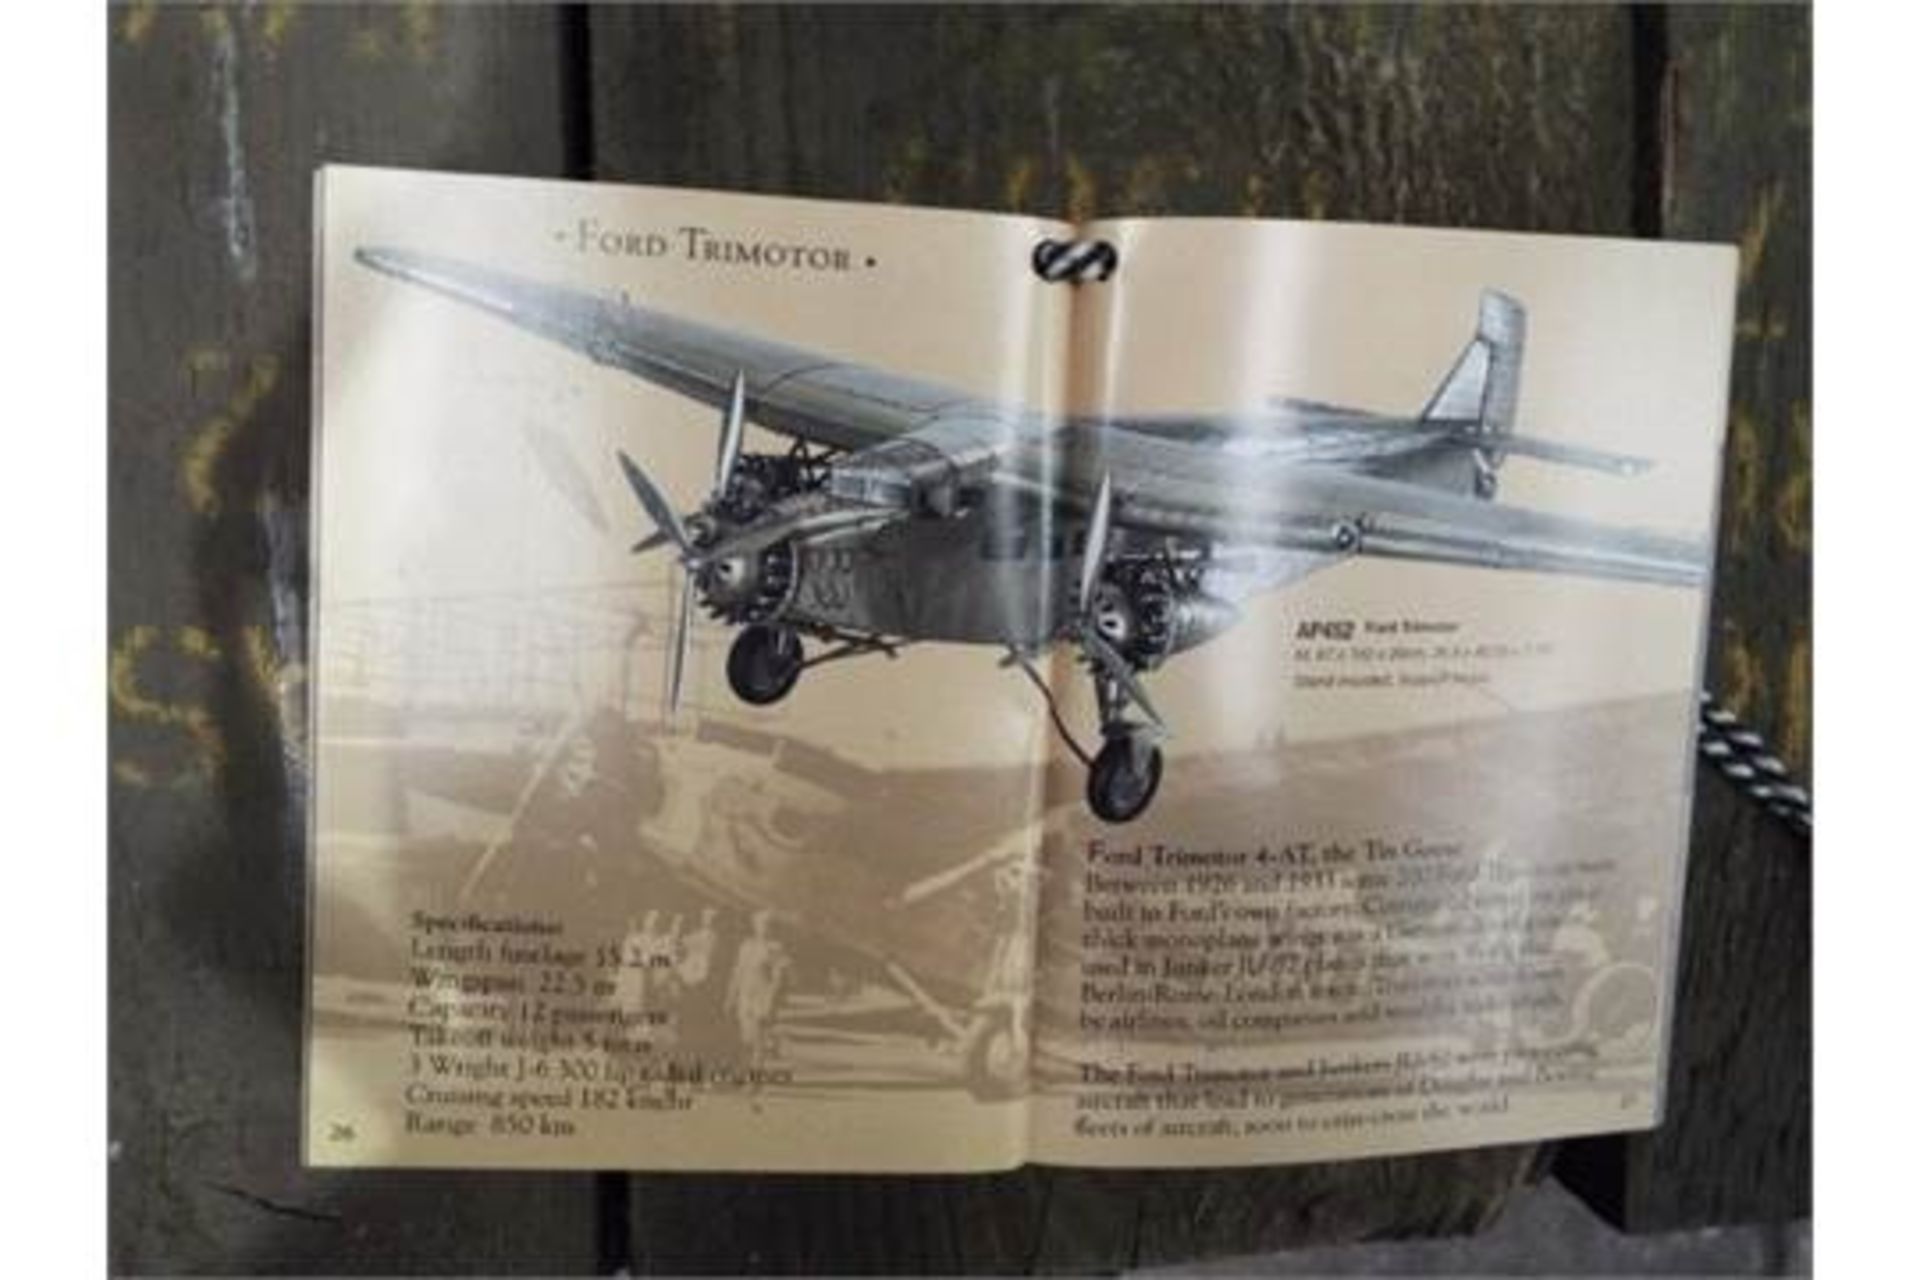 Ford Trimotor 4-AT "The Tin Goose" Aluminium Scale Model - Image 8 of 8